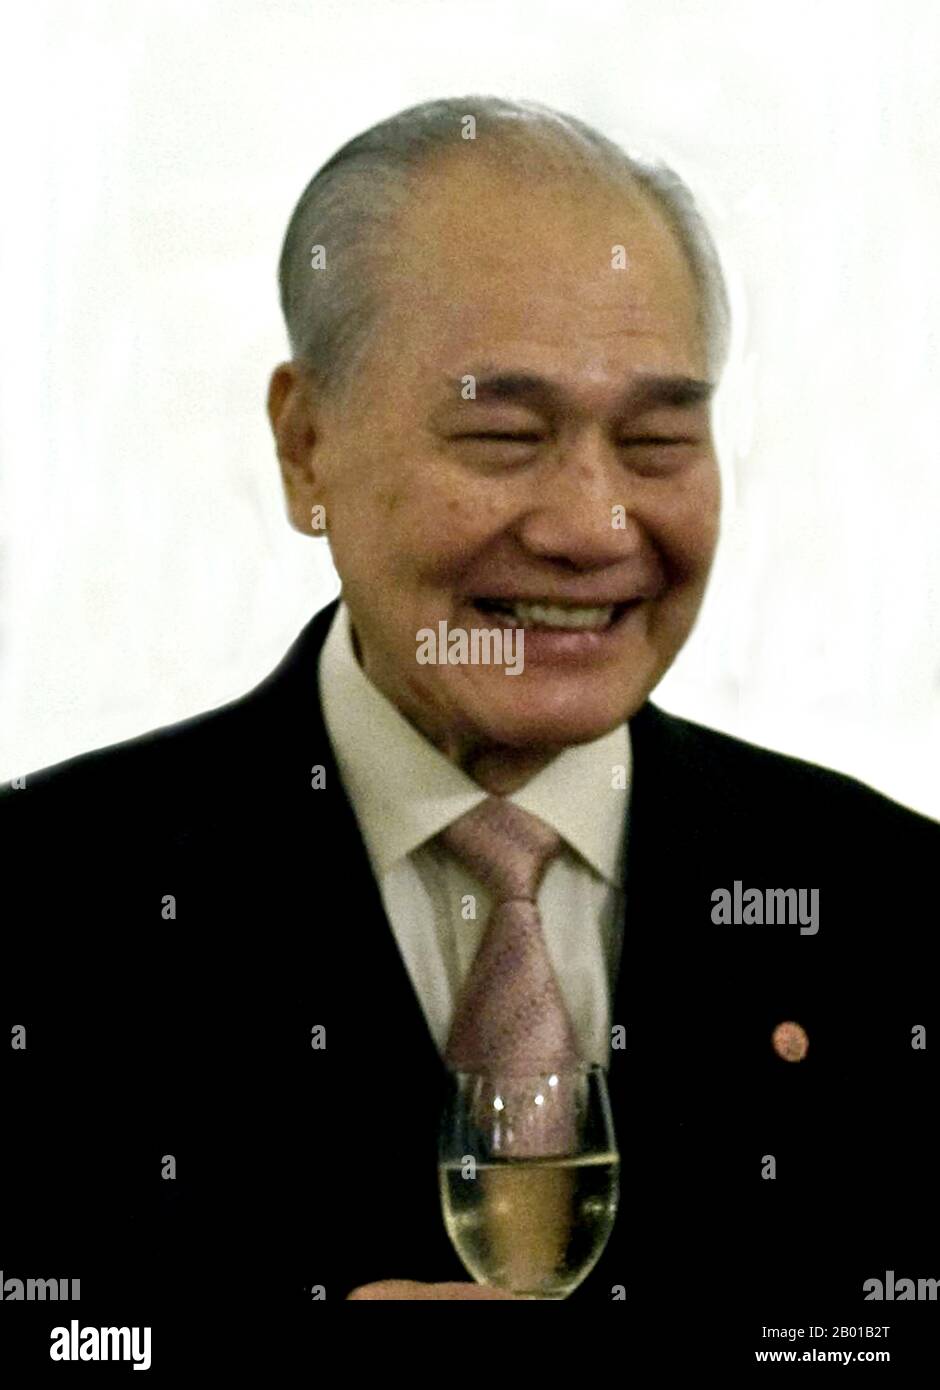 Thailand: Anand Panyarachun (9 August 1932 -), Prime Minister of Thailand (r. 1991-1992). Photo by Govt. of Thailand (CC BY 2.0 License), 2010.  Anand Panyarachun was Thailand's Prime Minister twice, between 1991-1992 and once again in the latter half of 1992. He was effective in instigating economic and political reforms, one of which was the drafting of Thailand's 'Peoples' Constitution', which was promulgated in 1997 and abrogated in 2006. Anand received a Ramon Magsaysay Award for Government Service in 1997. Stock Photo